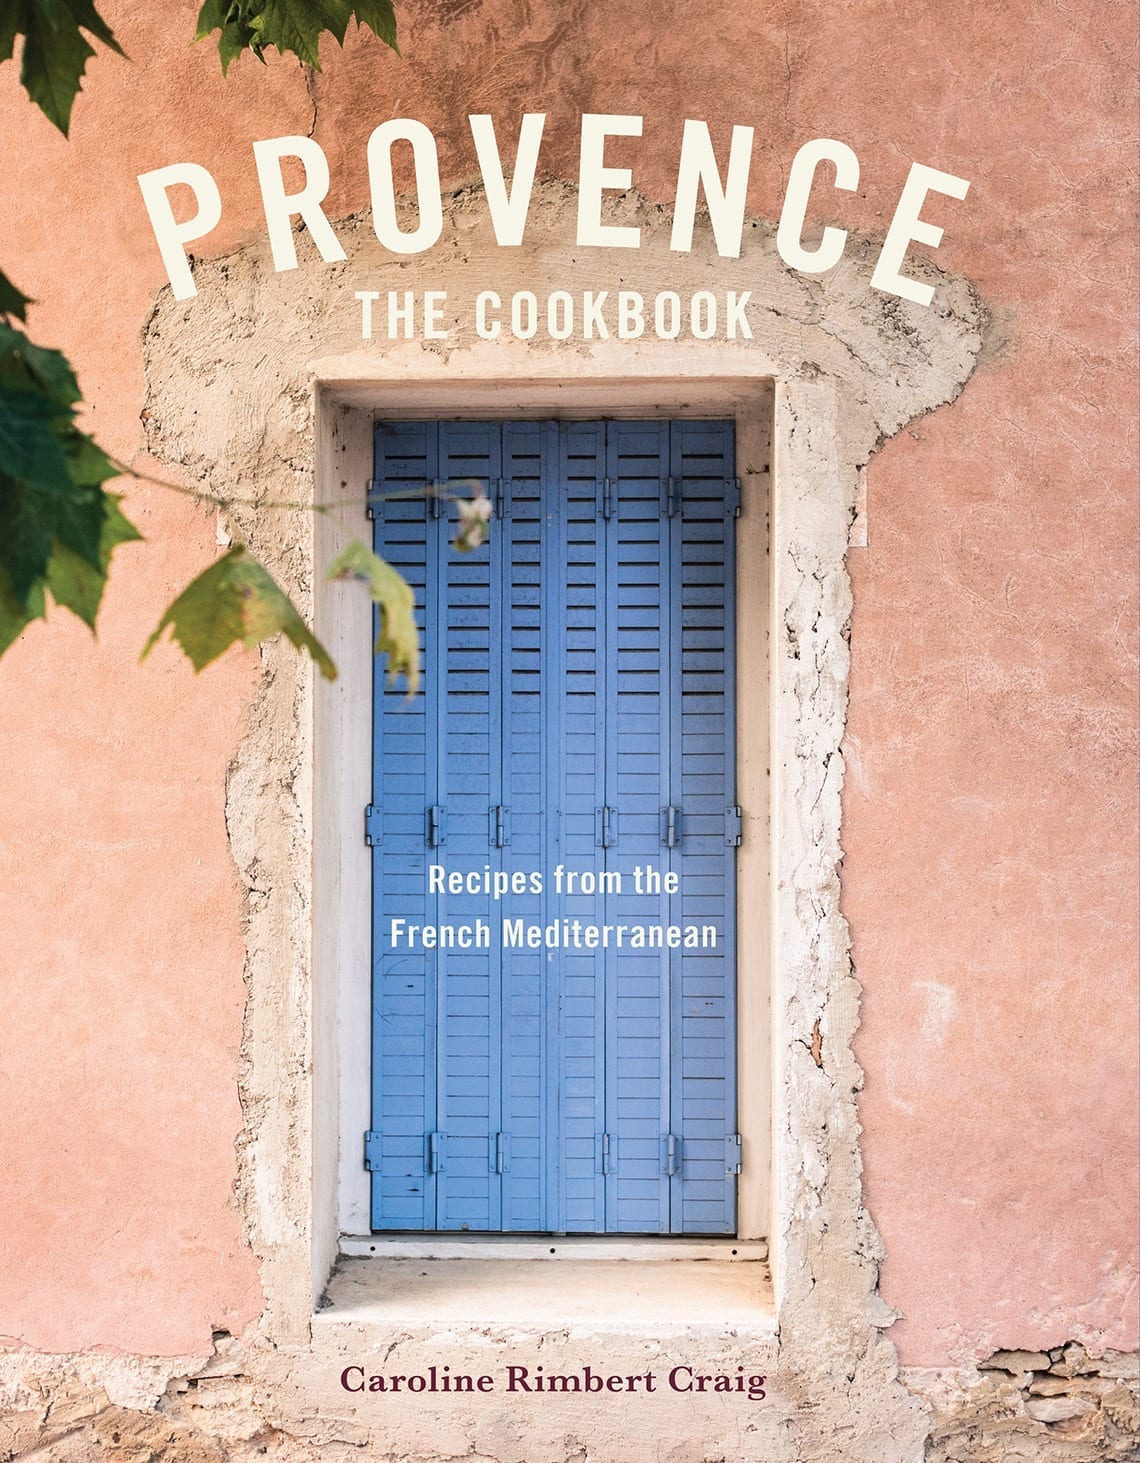 Provence: The Cookbook